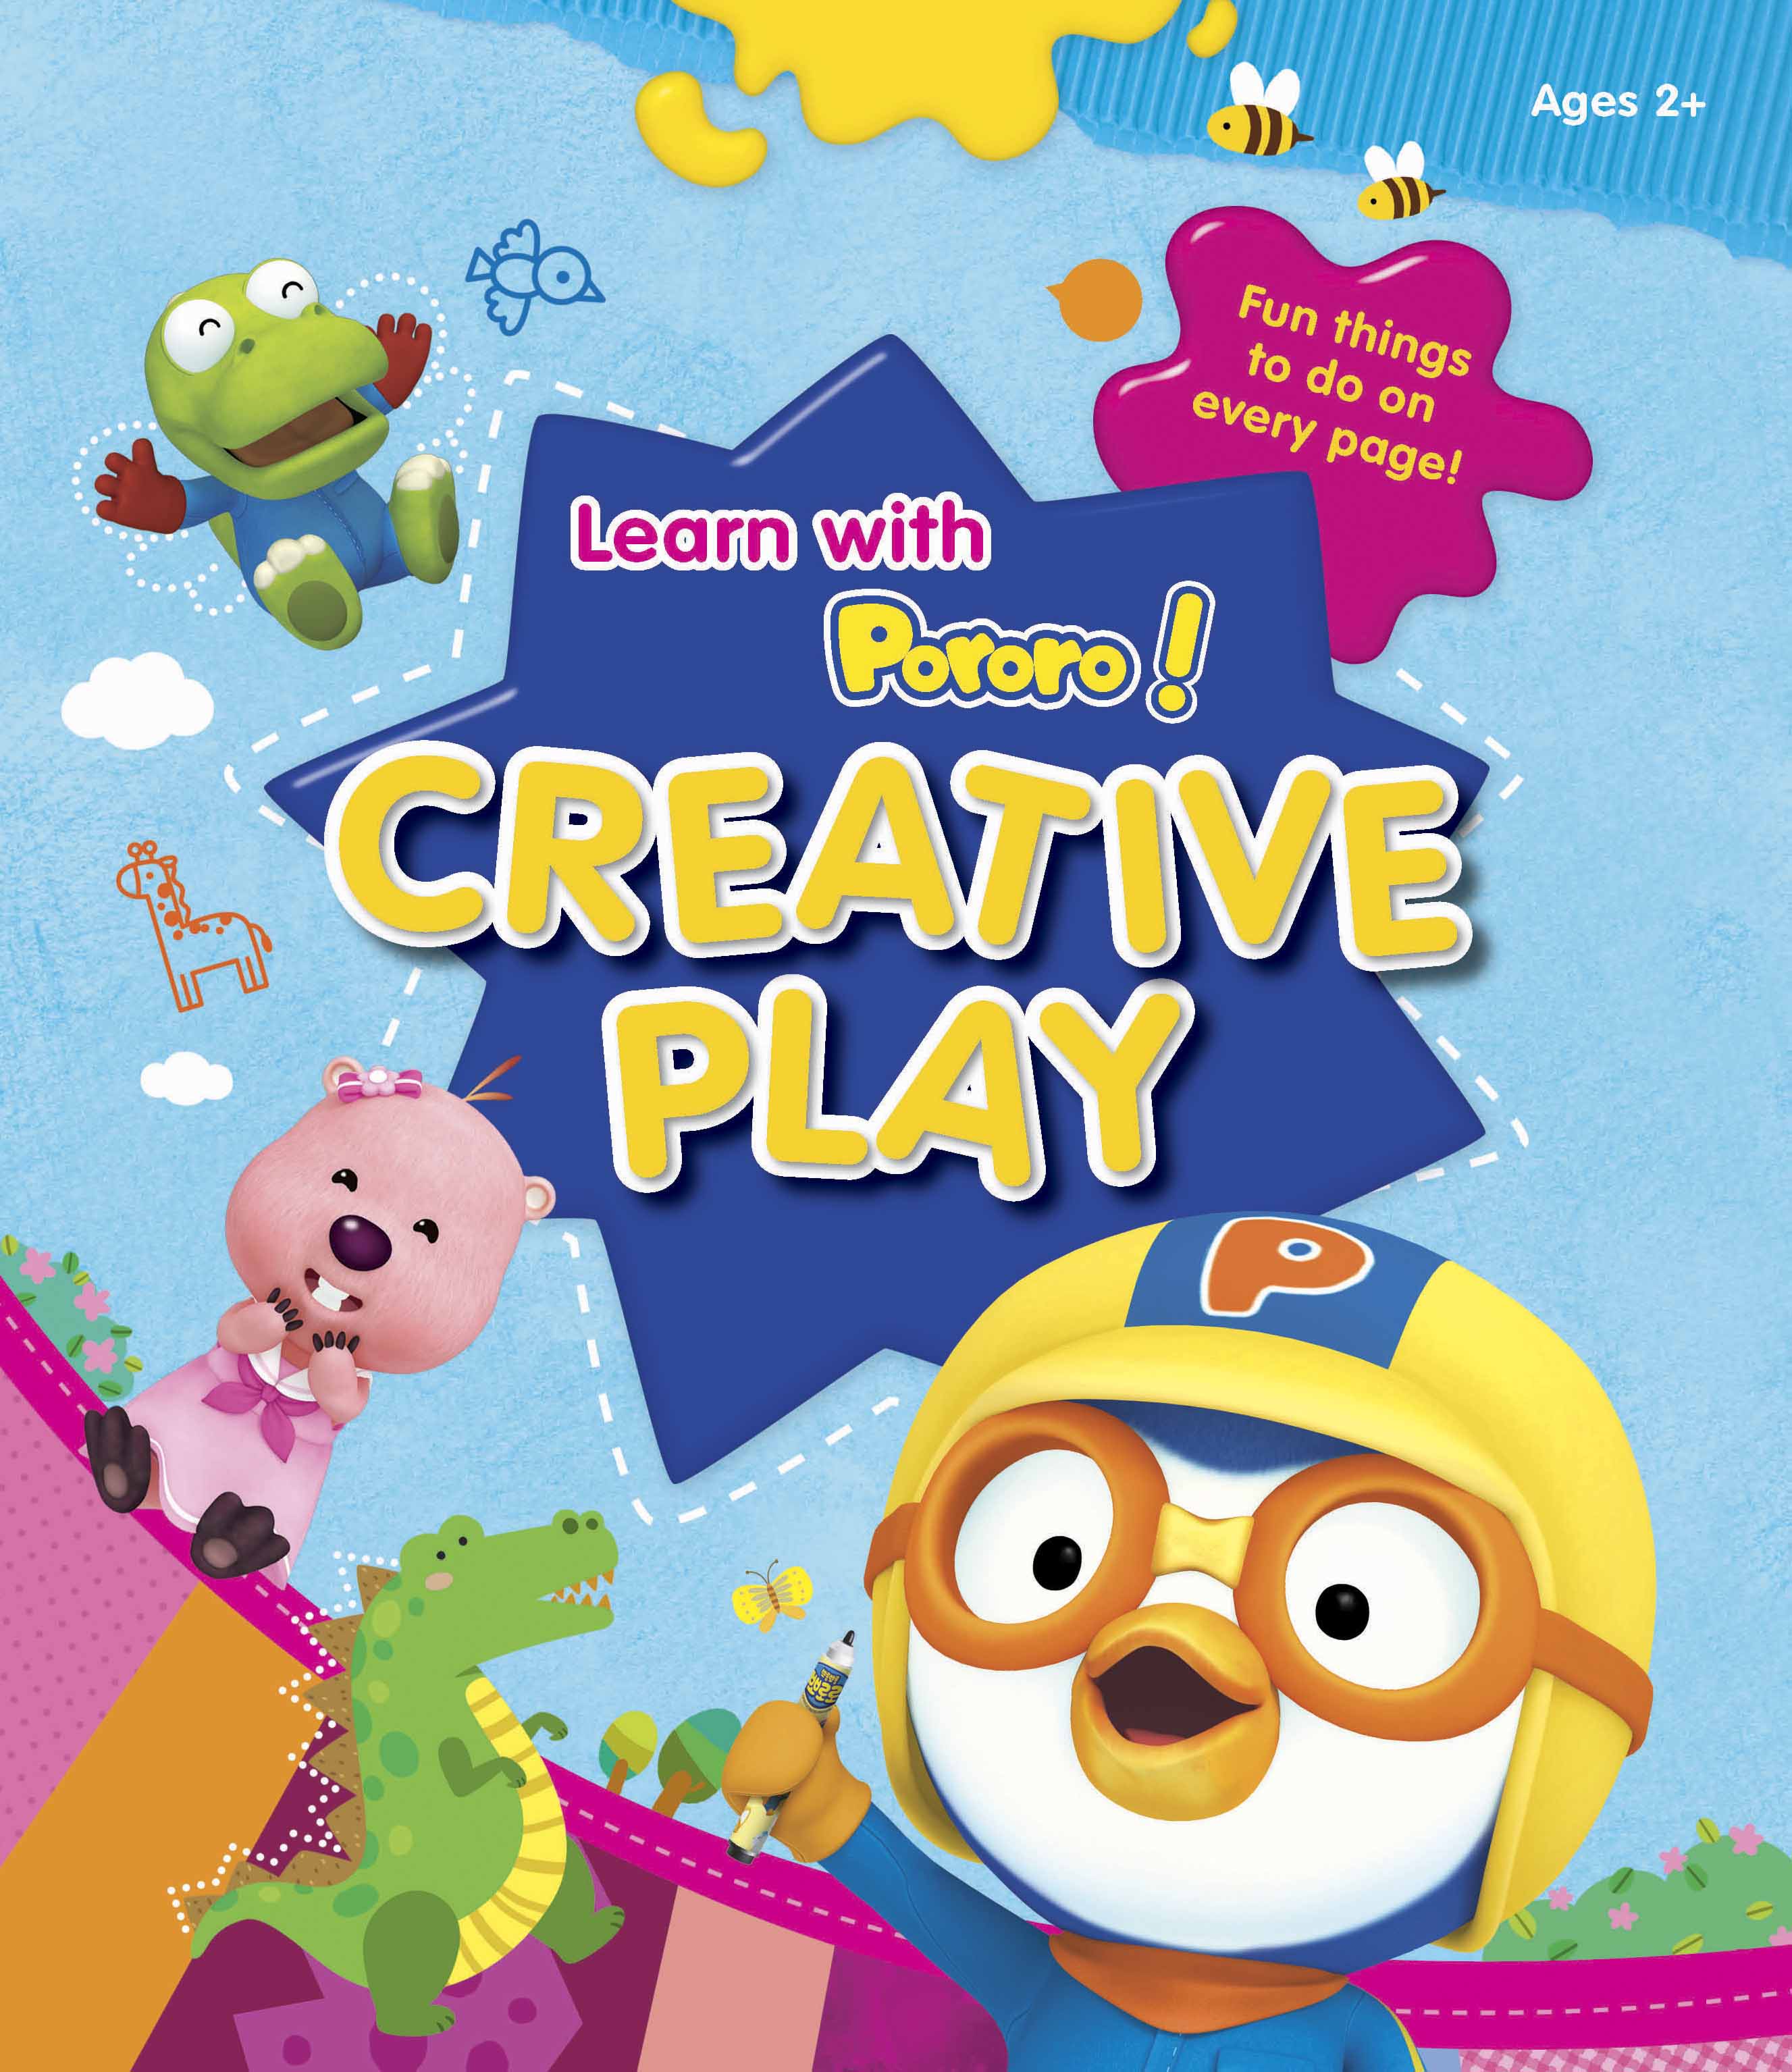 Learn with Pororo! Creative Play